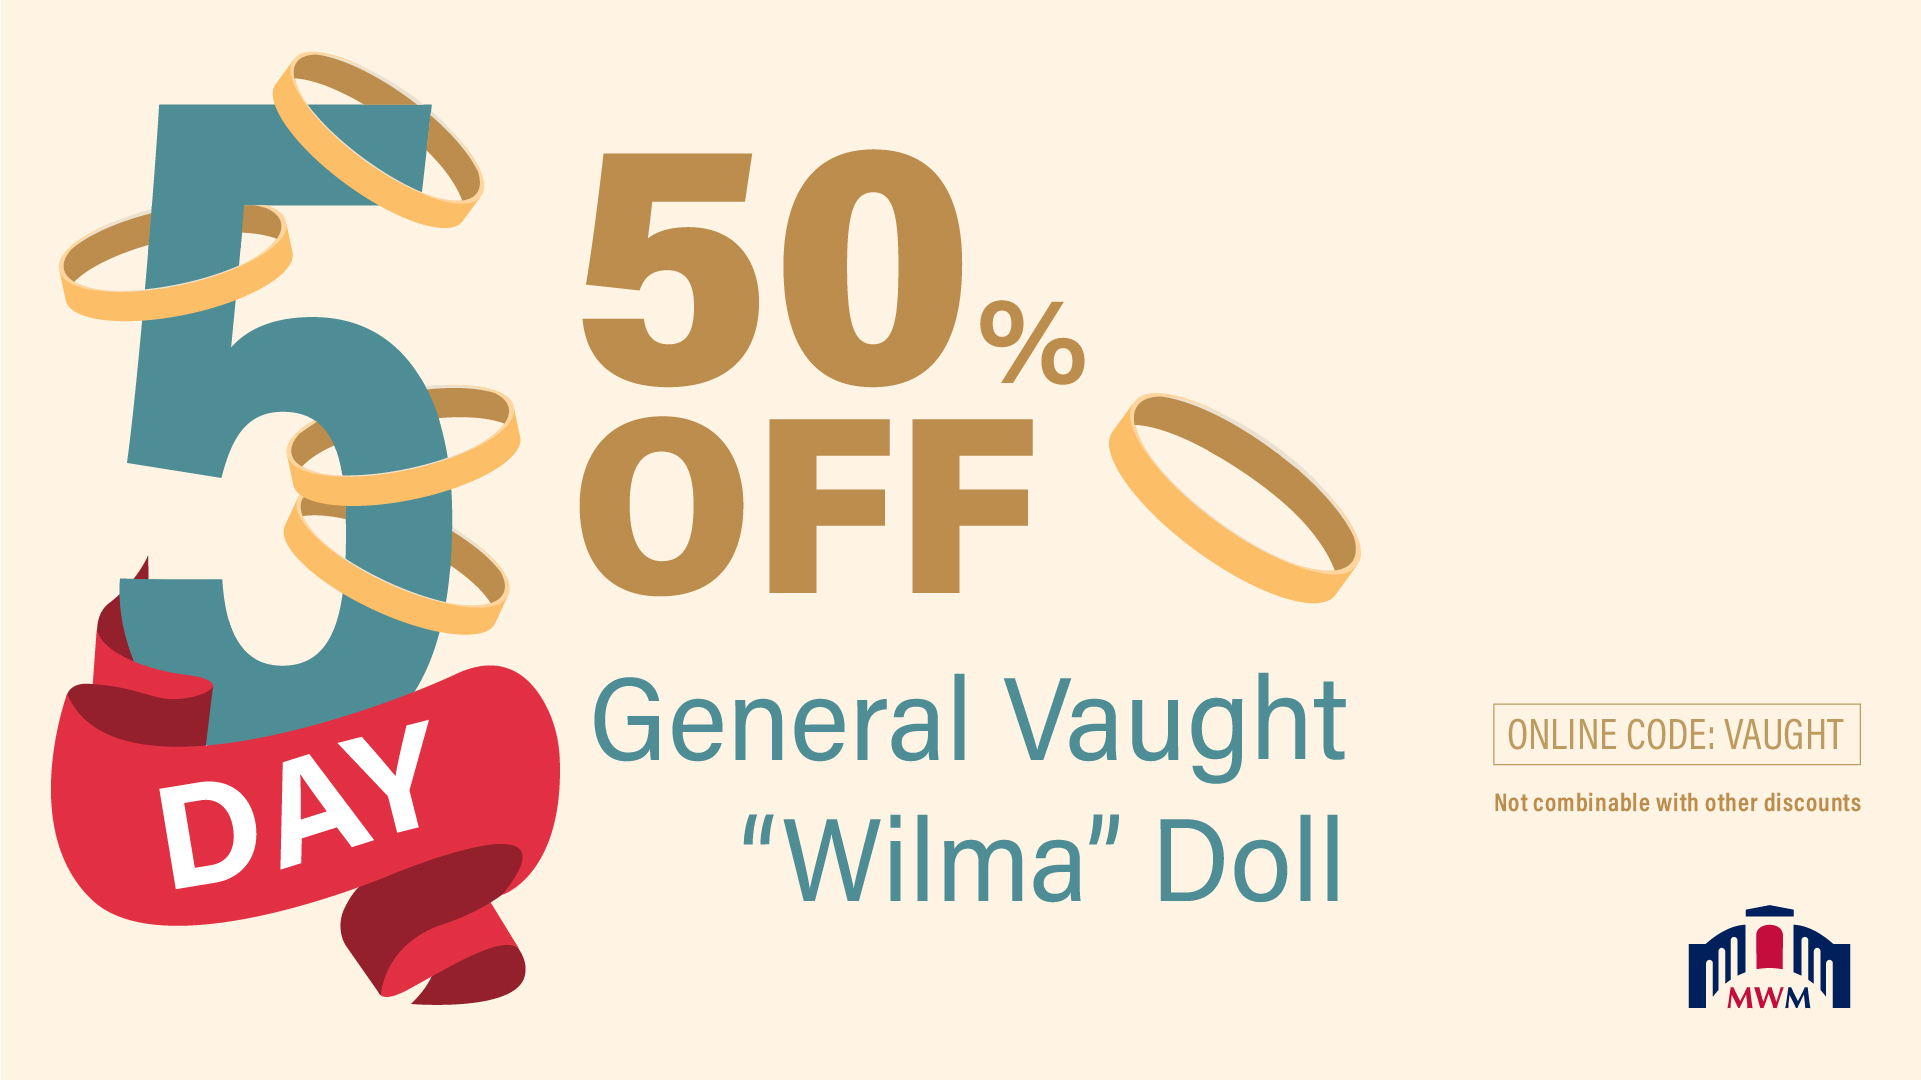 The Twelve Days of Christmas. Day 5 with five golden rings. The words 50% off, General Vaught "Wilma" doll.